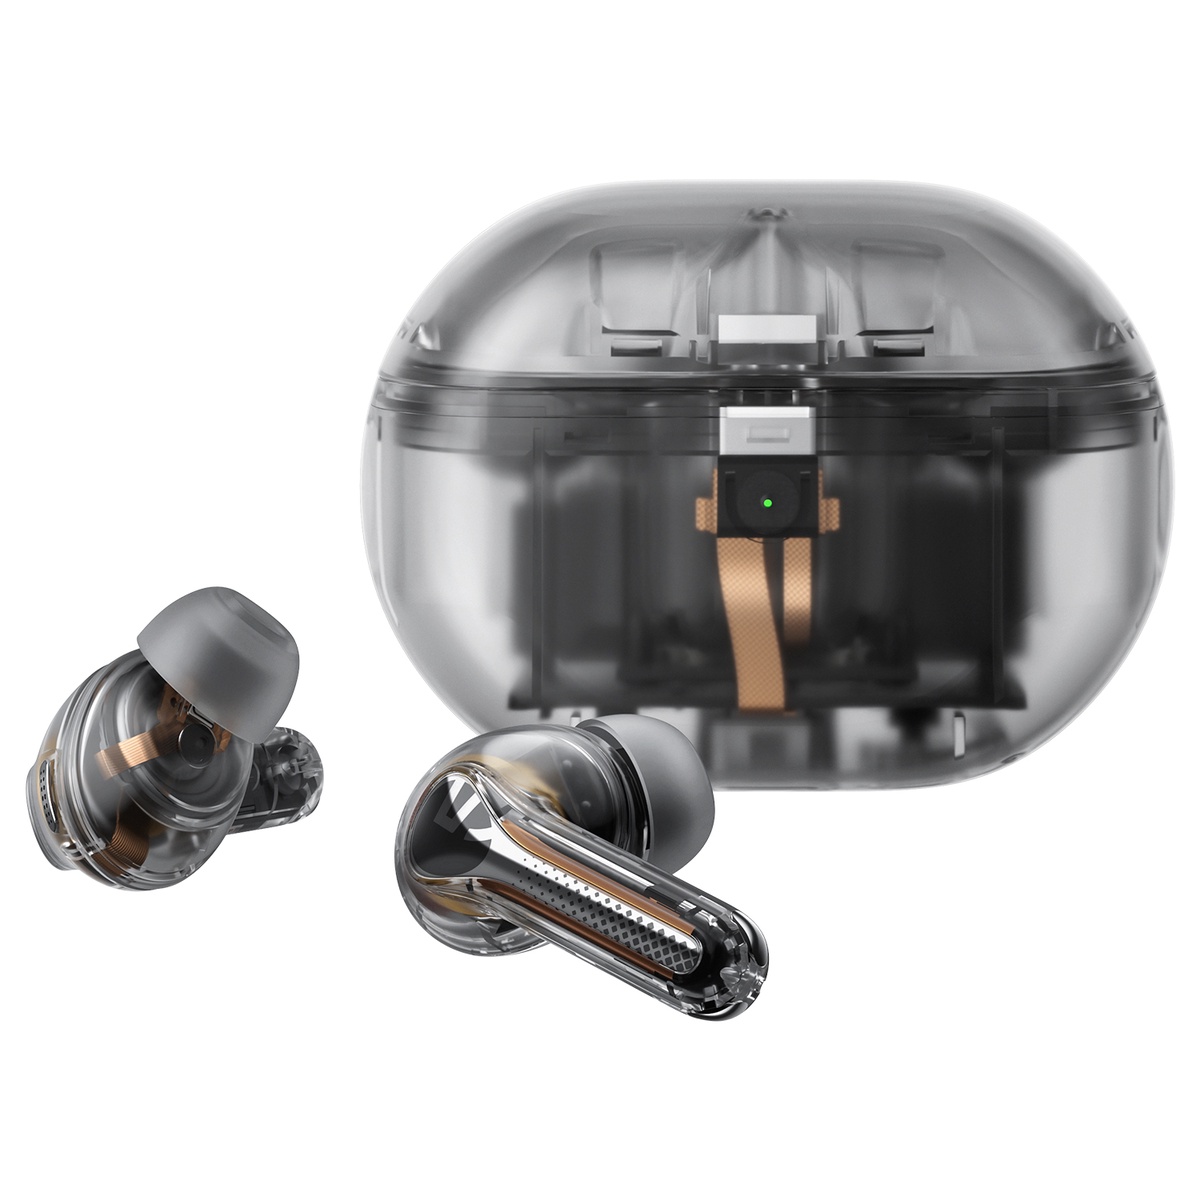 Immersive Sound Experience Unleashed: A Dive into the Soundpeats Opera 05 Hi-Res Wireless Earbuds